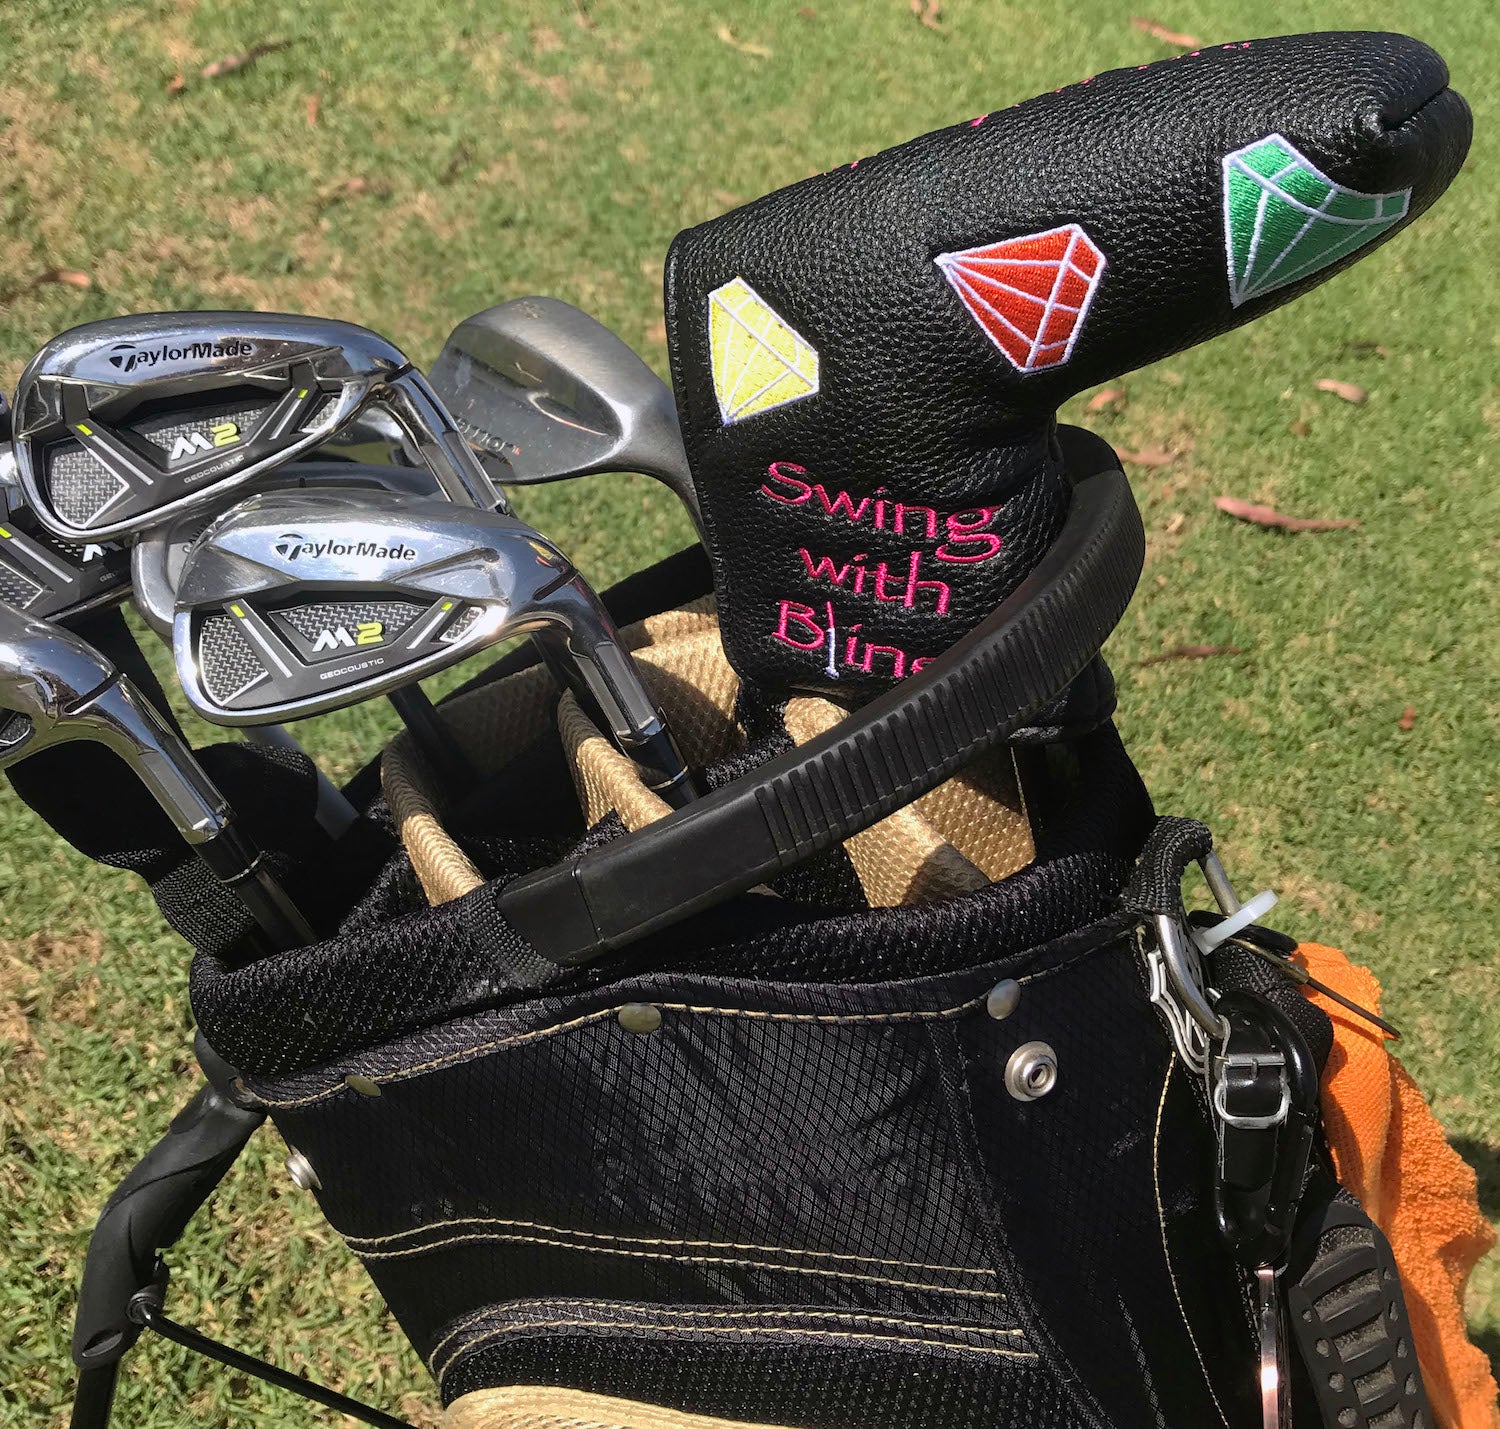 Swing With Bling Blade Putter Cover (Velcro Closure)